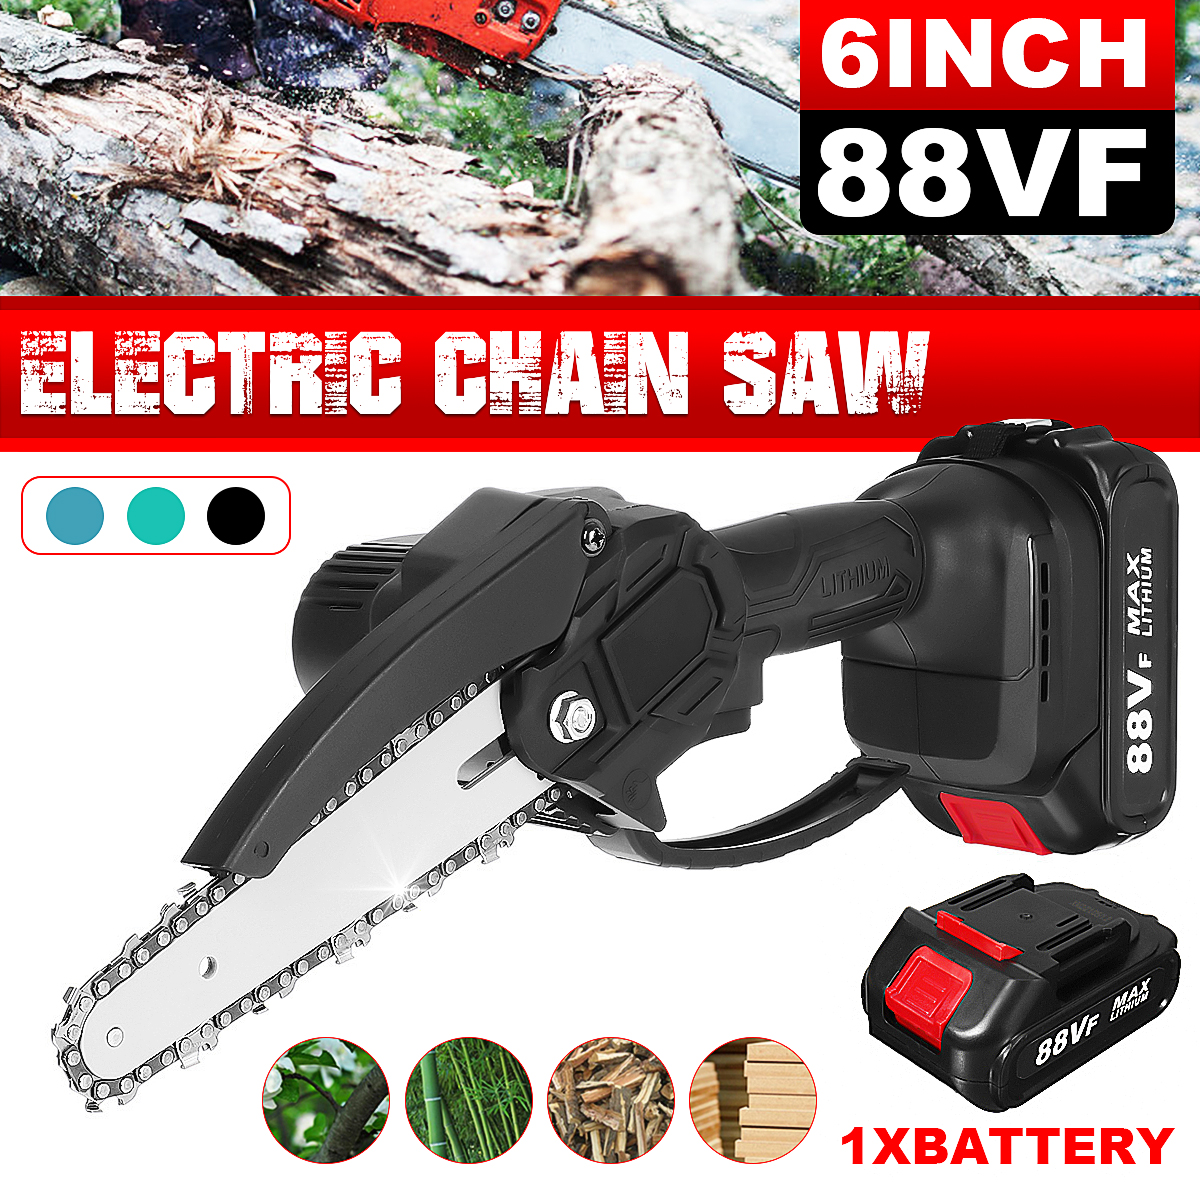 88VF-Electric-Saw-Cordless-6-Inch-One-Hand-Chain-Saws-Woodworking-Cutting-Tool-W-1-Battery-1855400-1